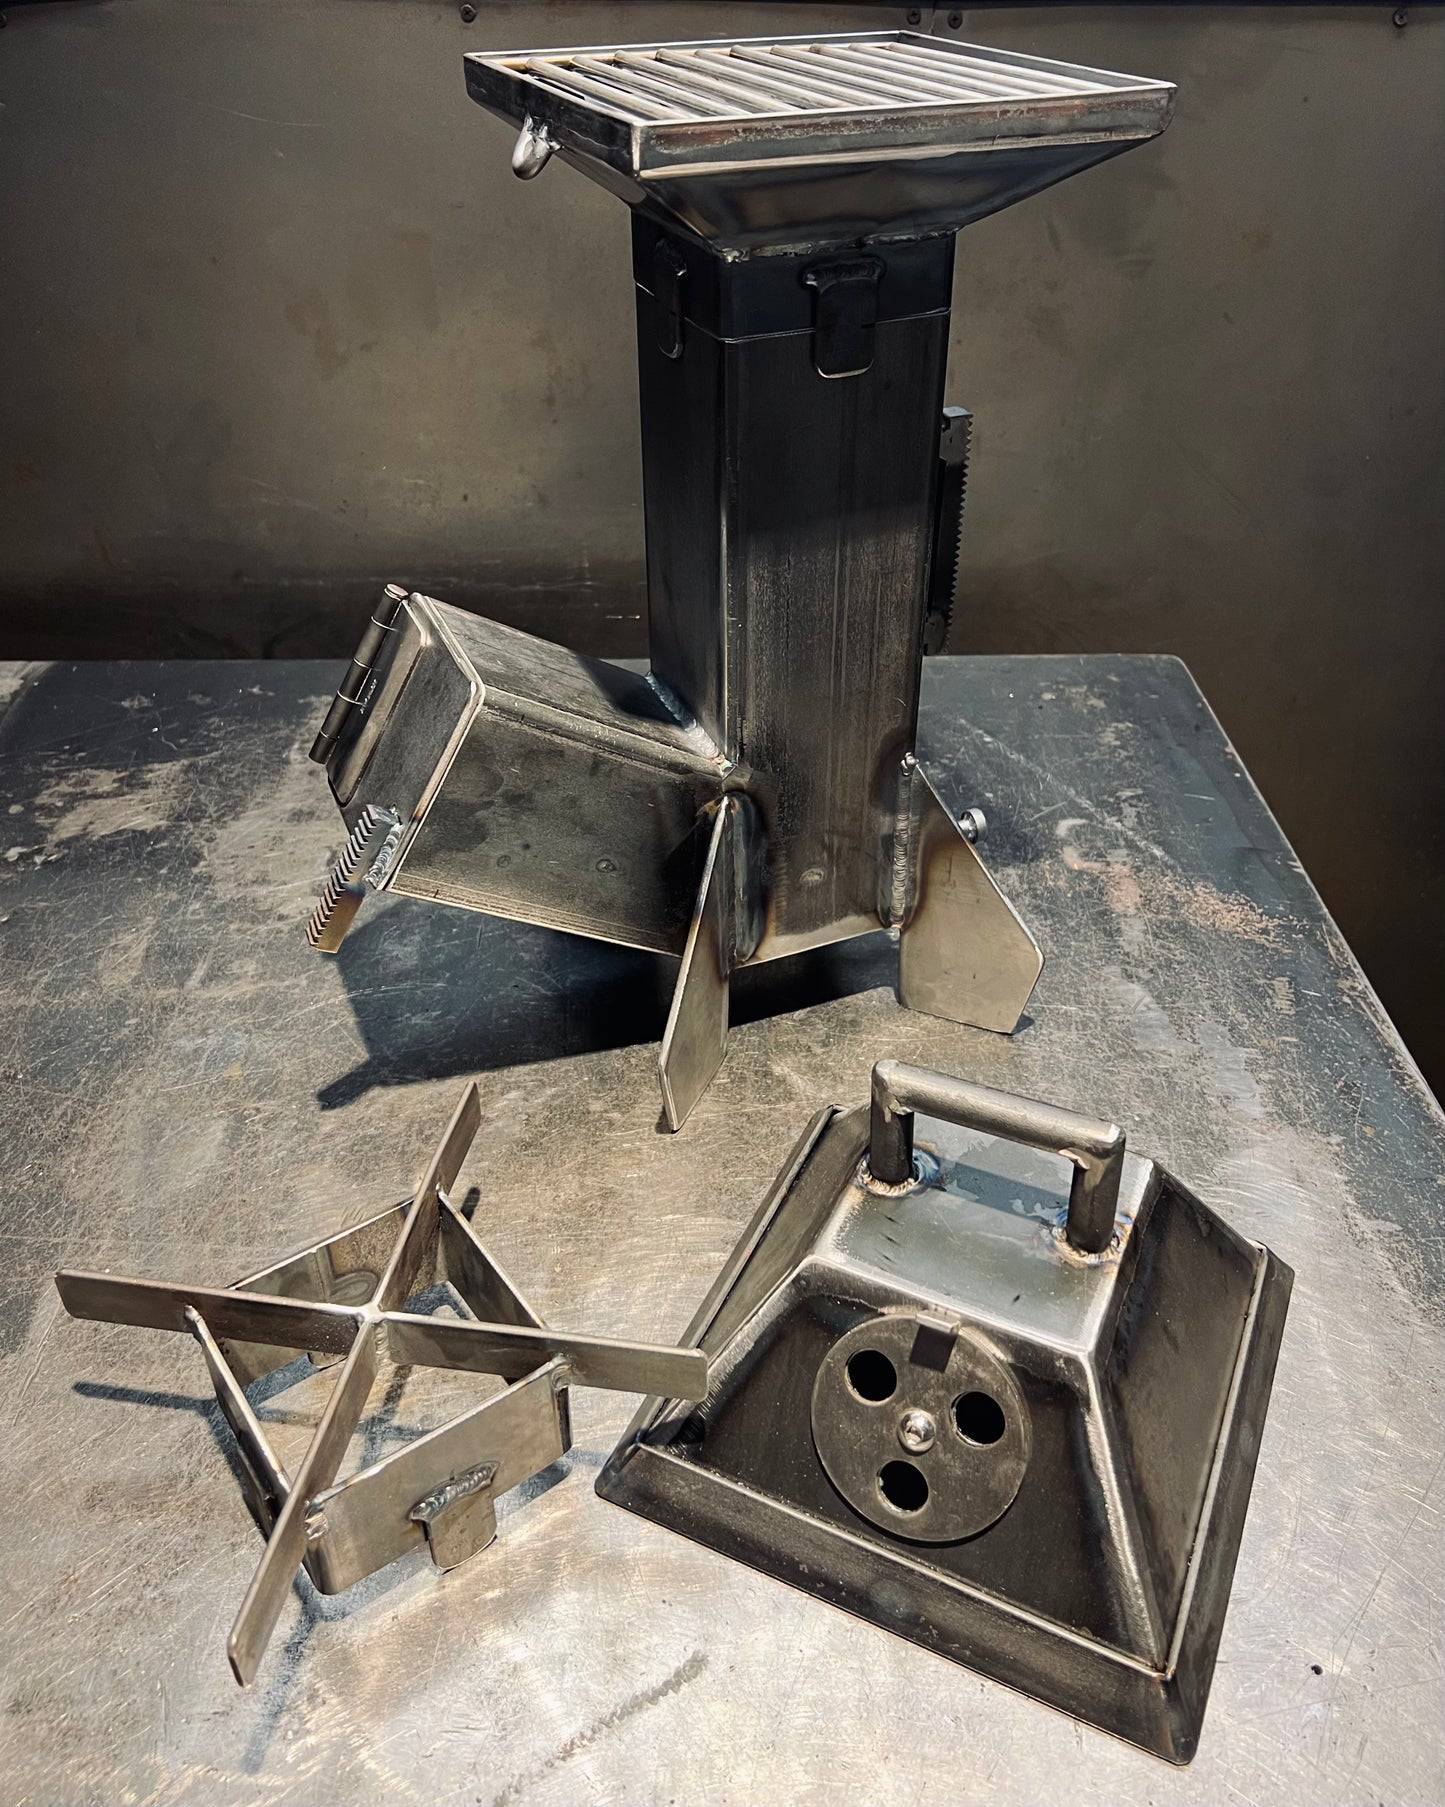 Rocket Stove 4" w/ Stainless Grill & Lid Attachment